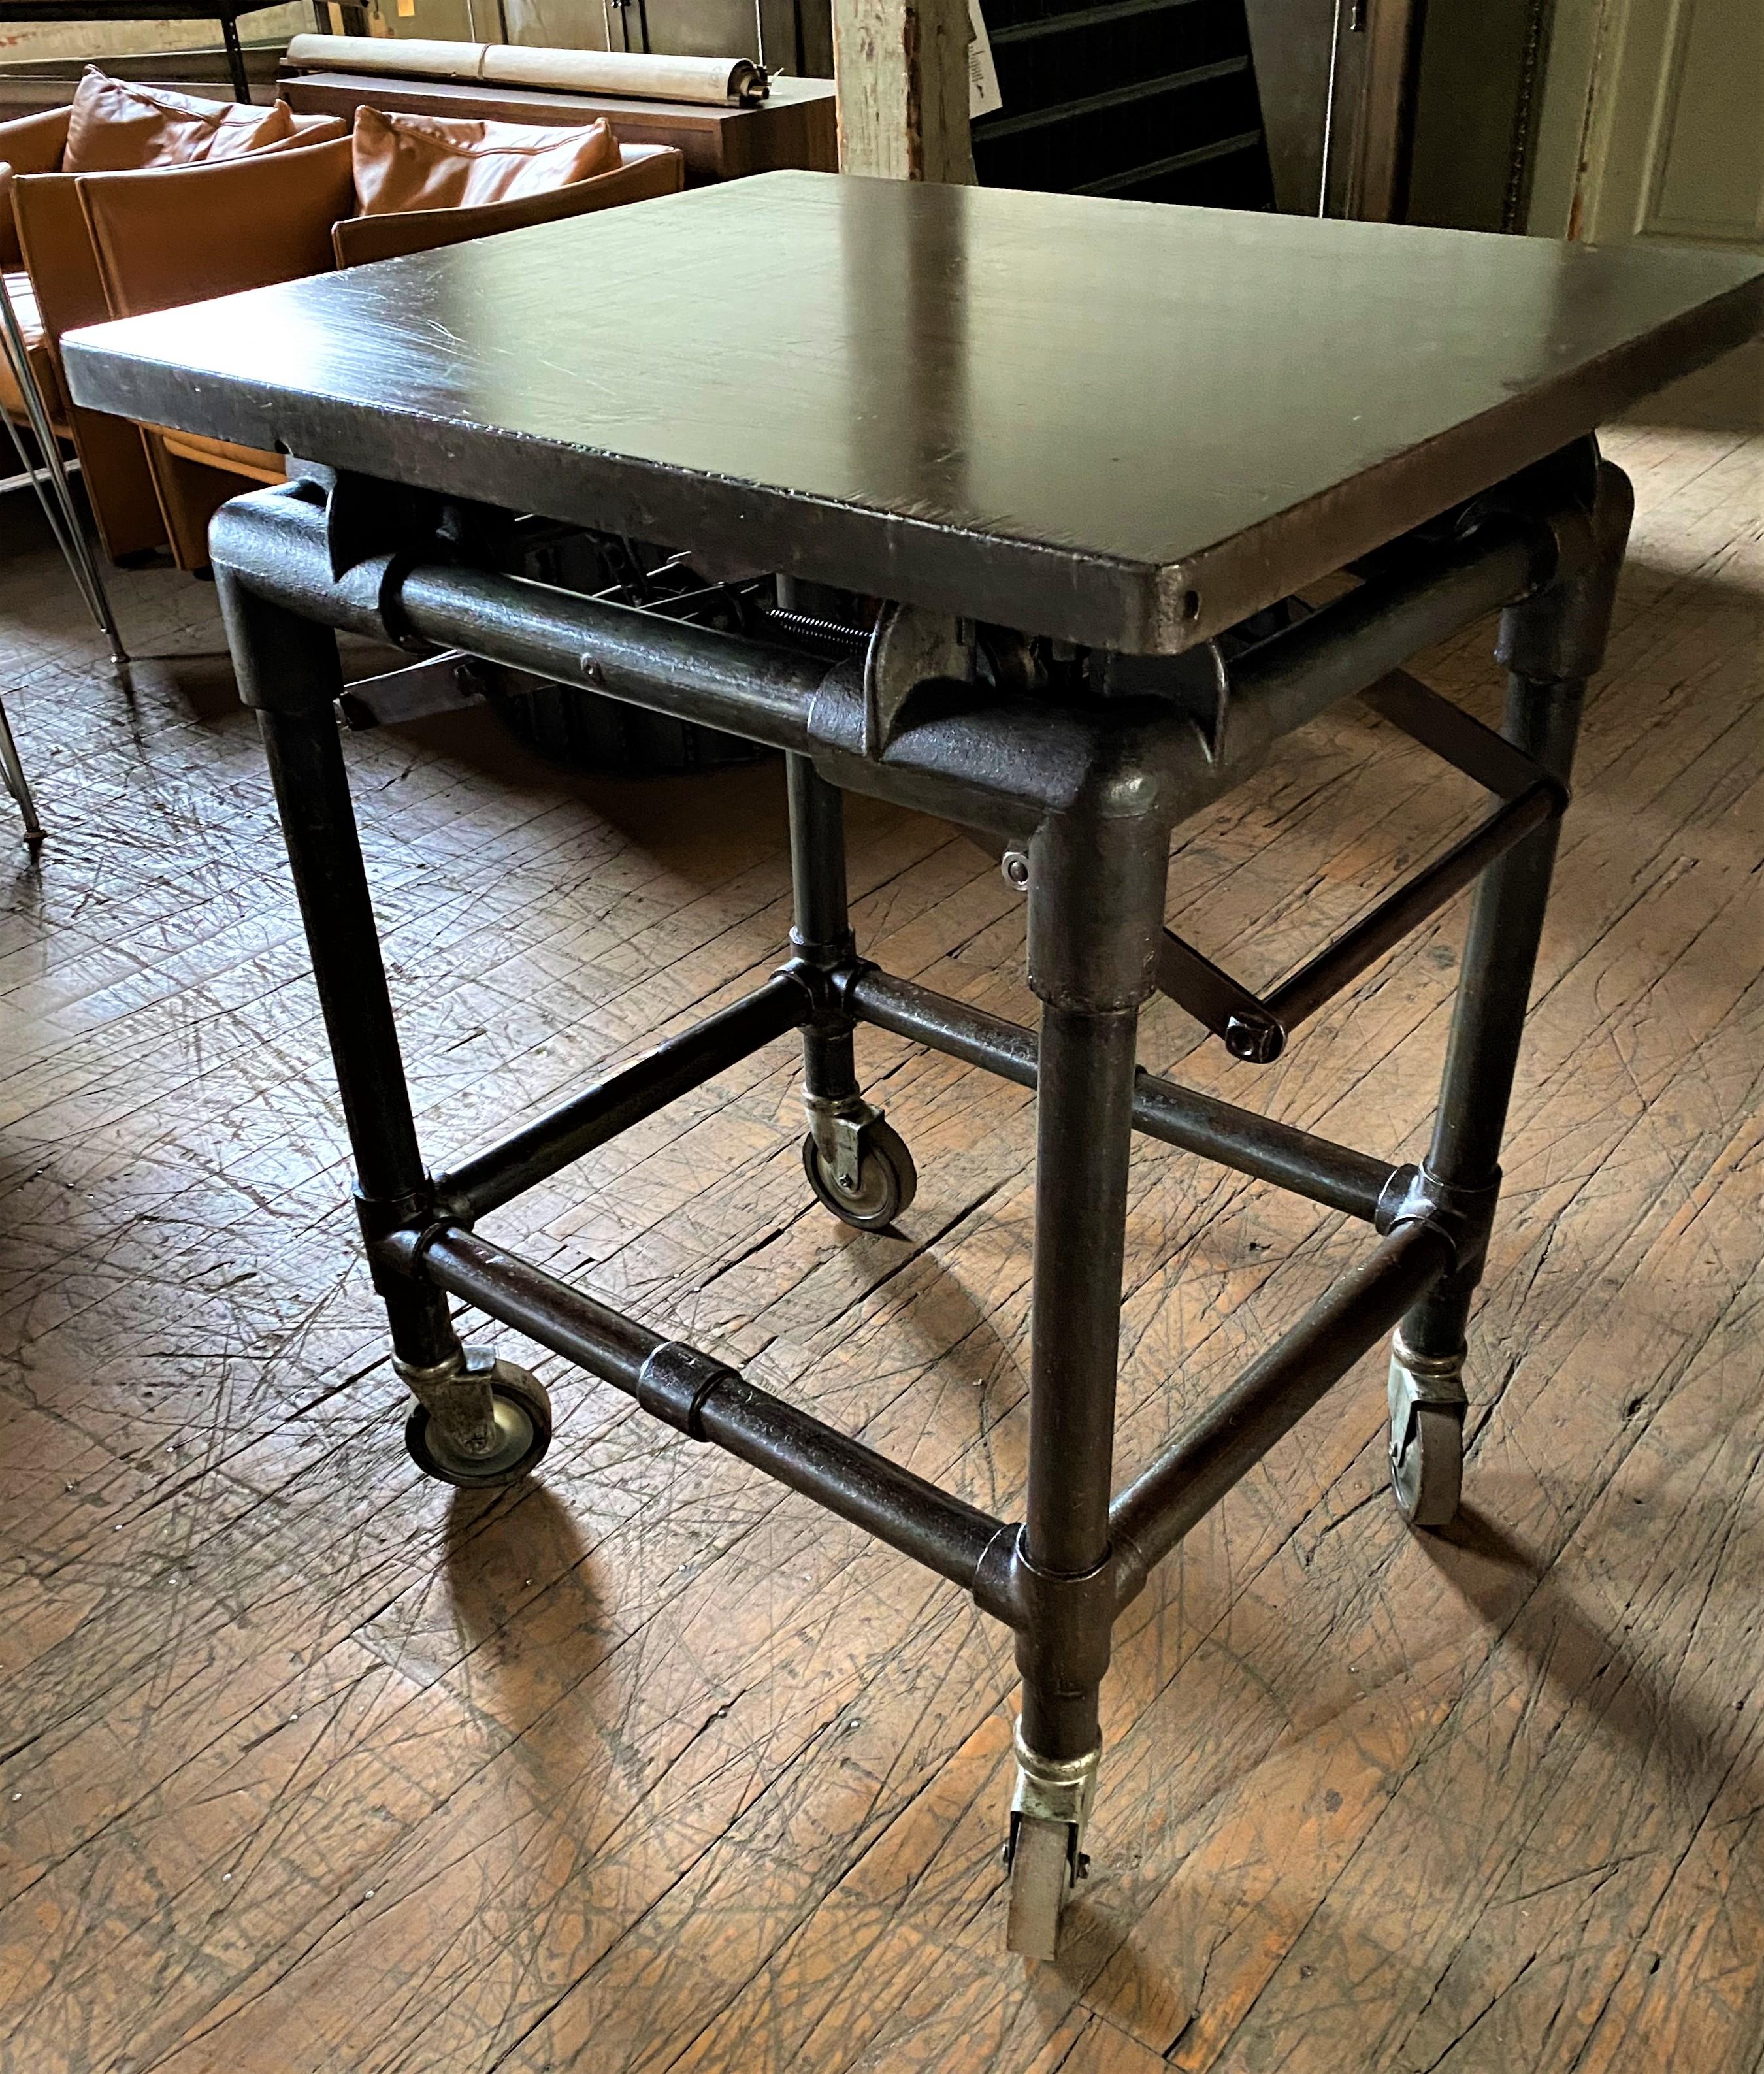 Printer's Turtle table
Overall Dimensions: 25 1/2